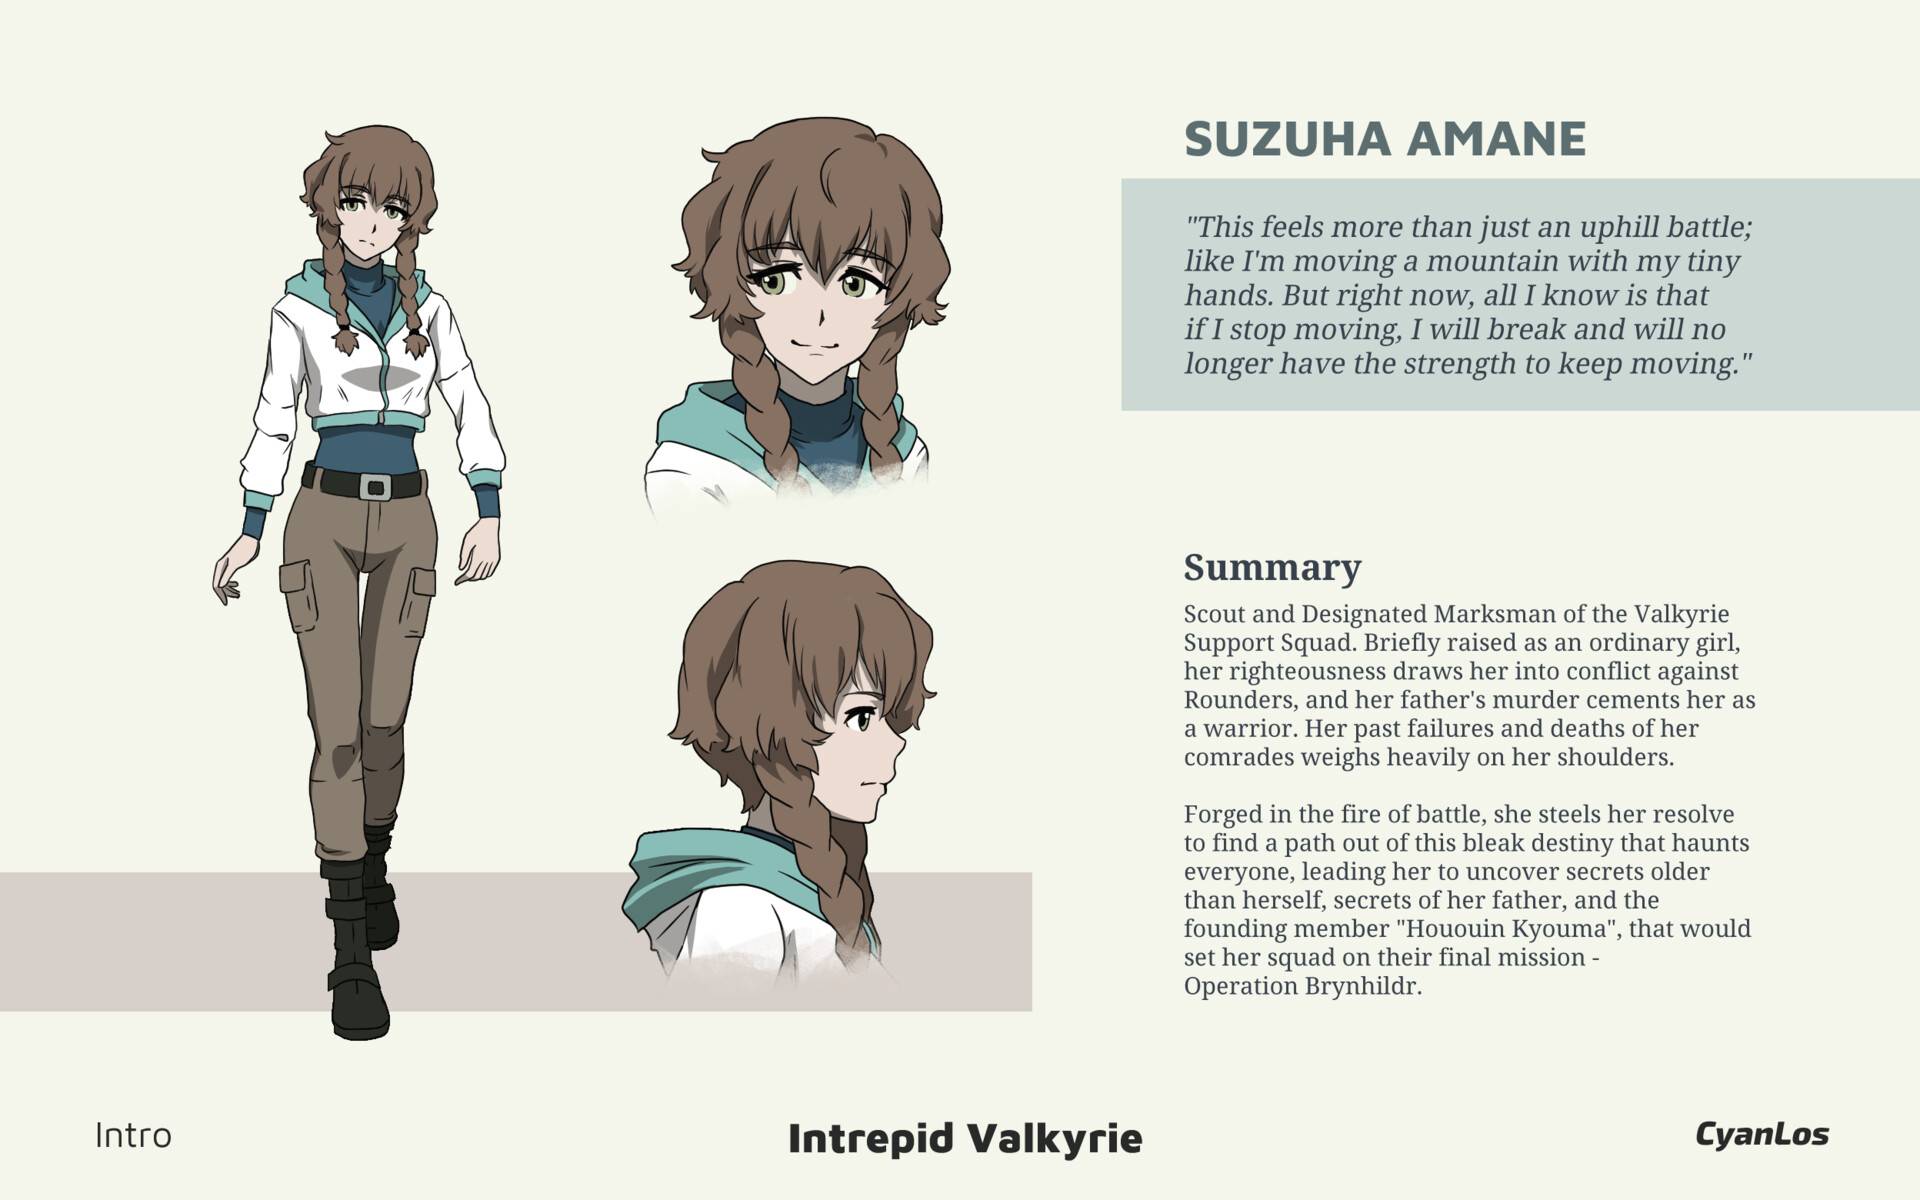 Steins;Gate 0 Anime Visual, Character Designs Revealed - VGCultureHQ